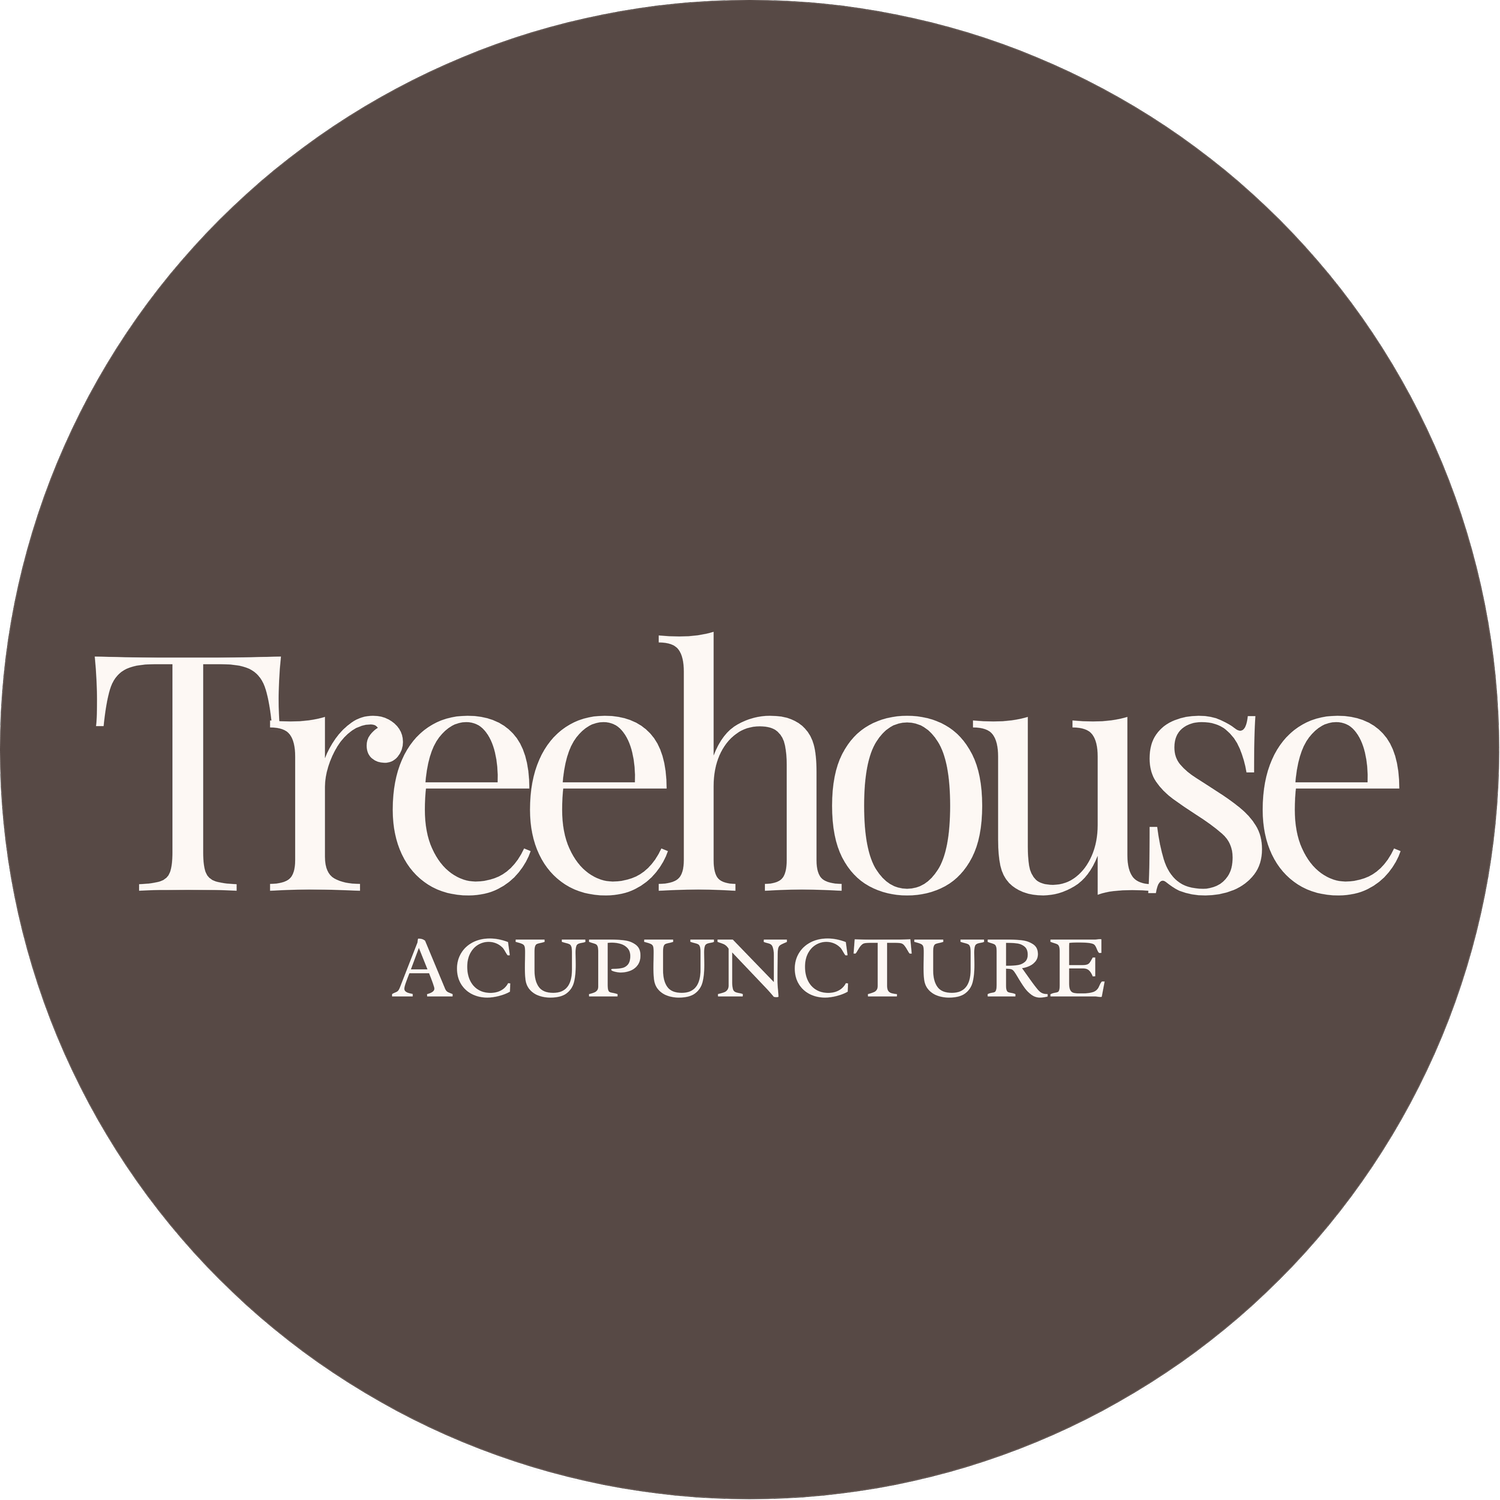 treehouse-acupuncture.com